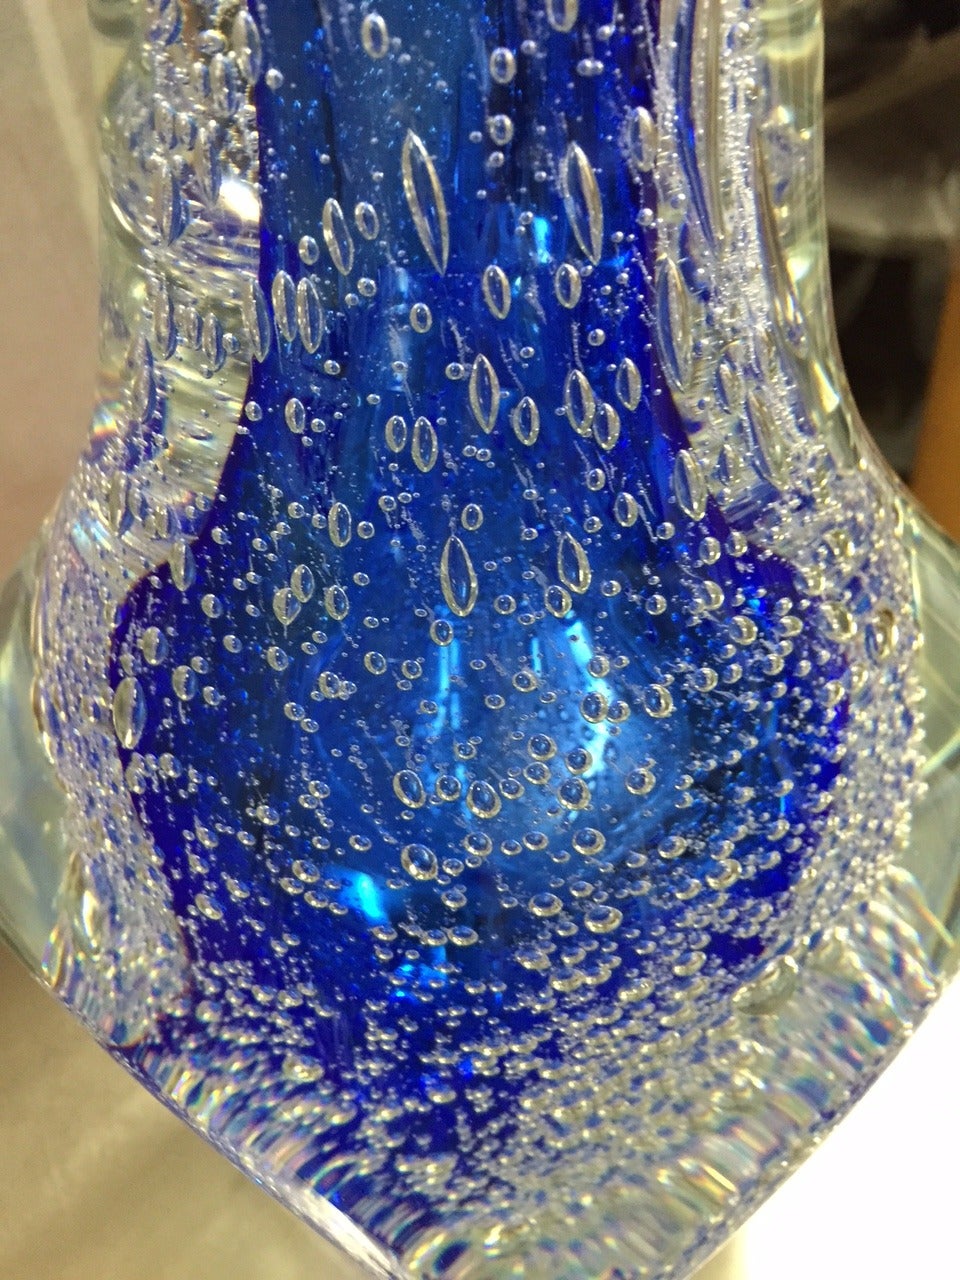 Heavy quality Murano vase. Stunning blue color to the center.